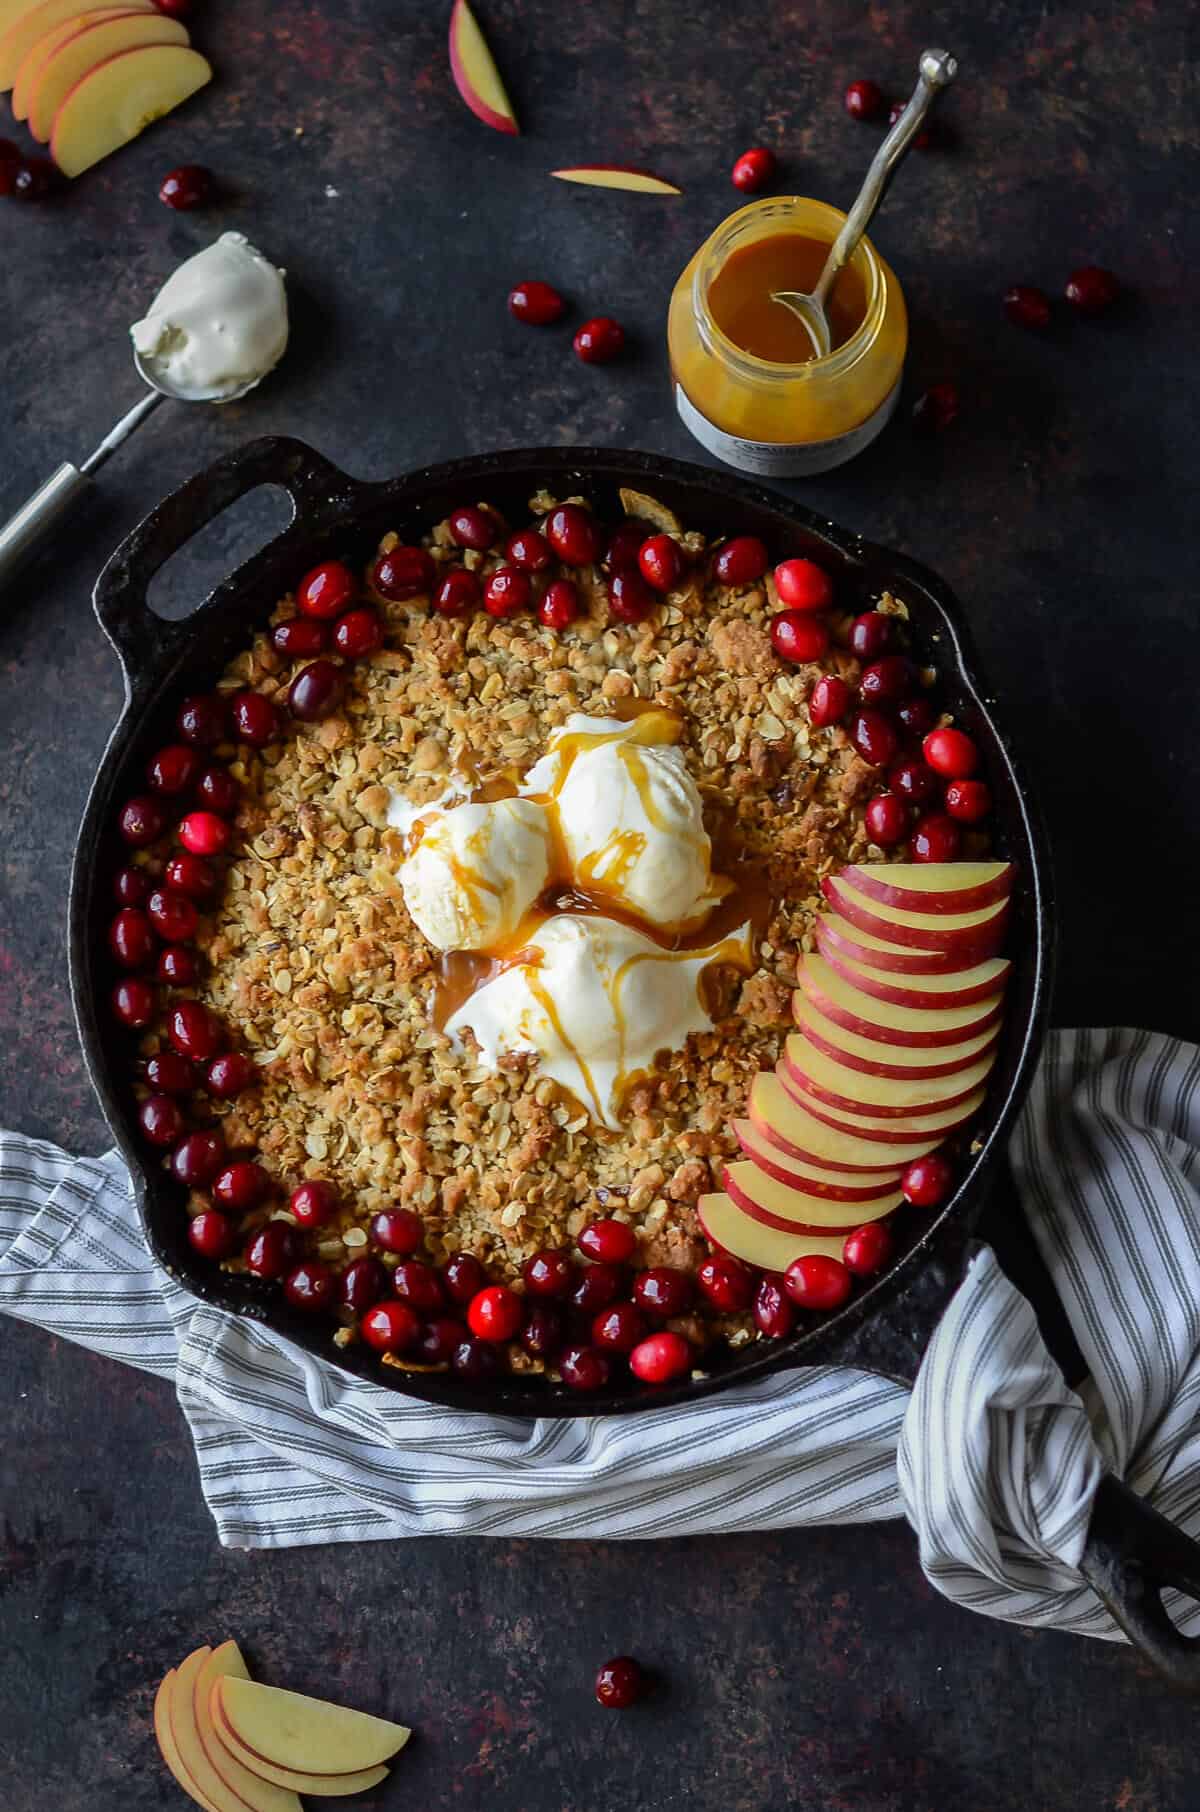 cast iron skillet filled with maple apple crisp and topped with fresh cranberries, apple slices and vanilla ice cream drizzled with caramel sauce